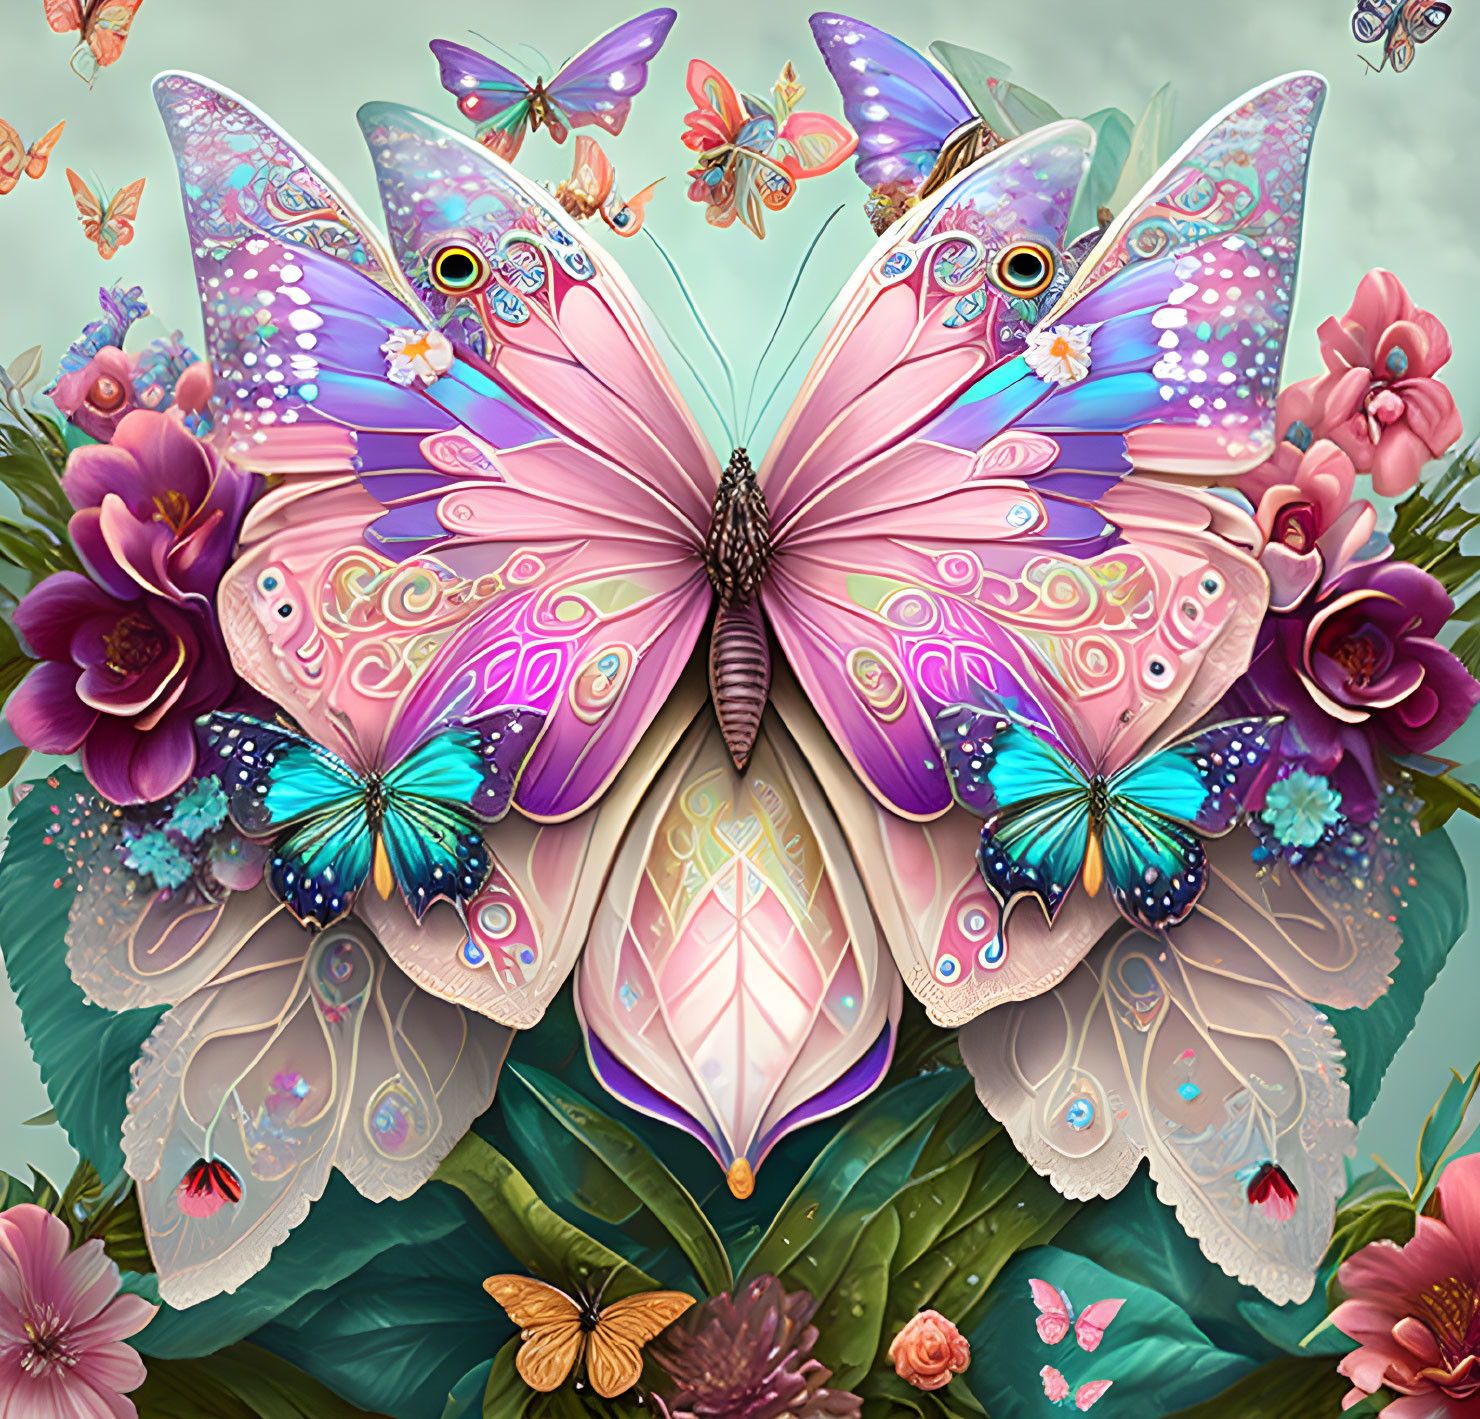 Colorful Digital Artwork Featuring Ornate Butterfly and Floral Background